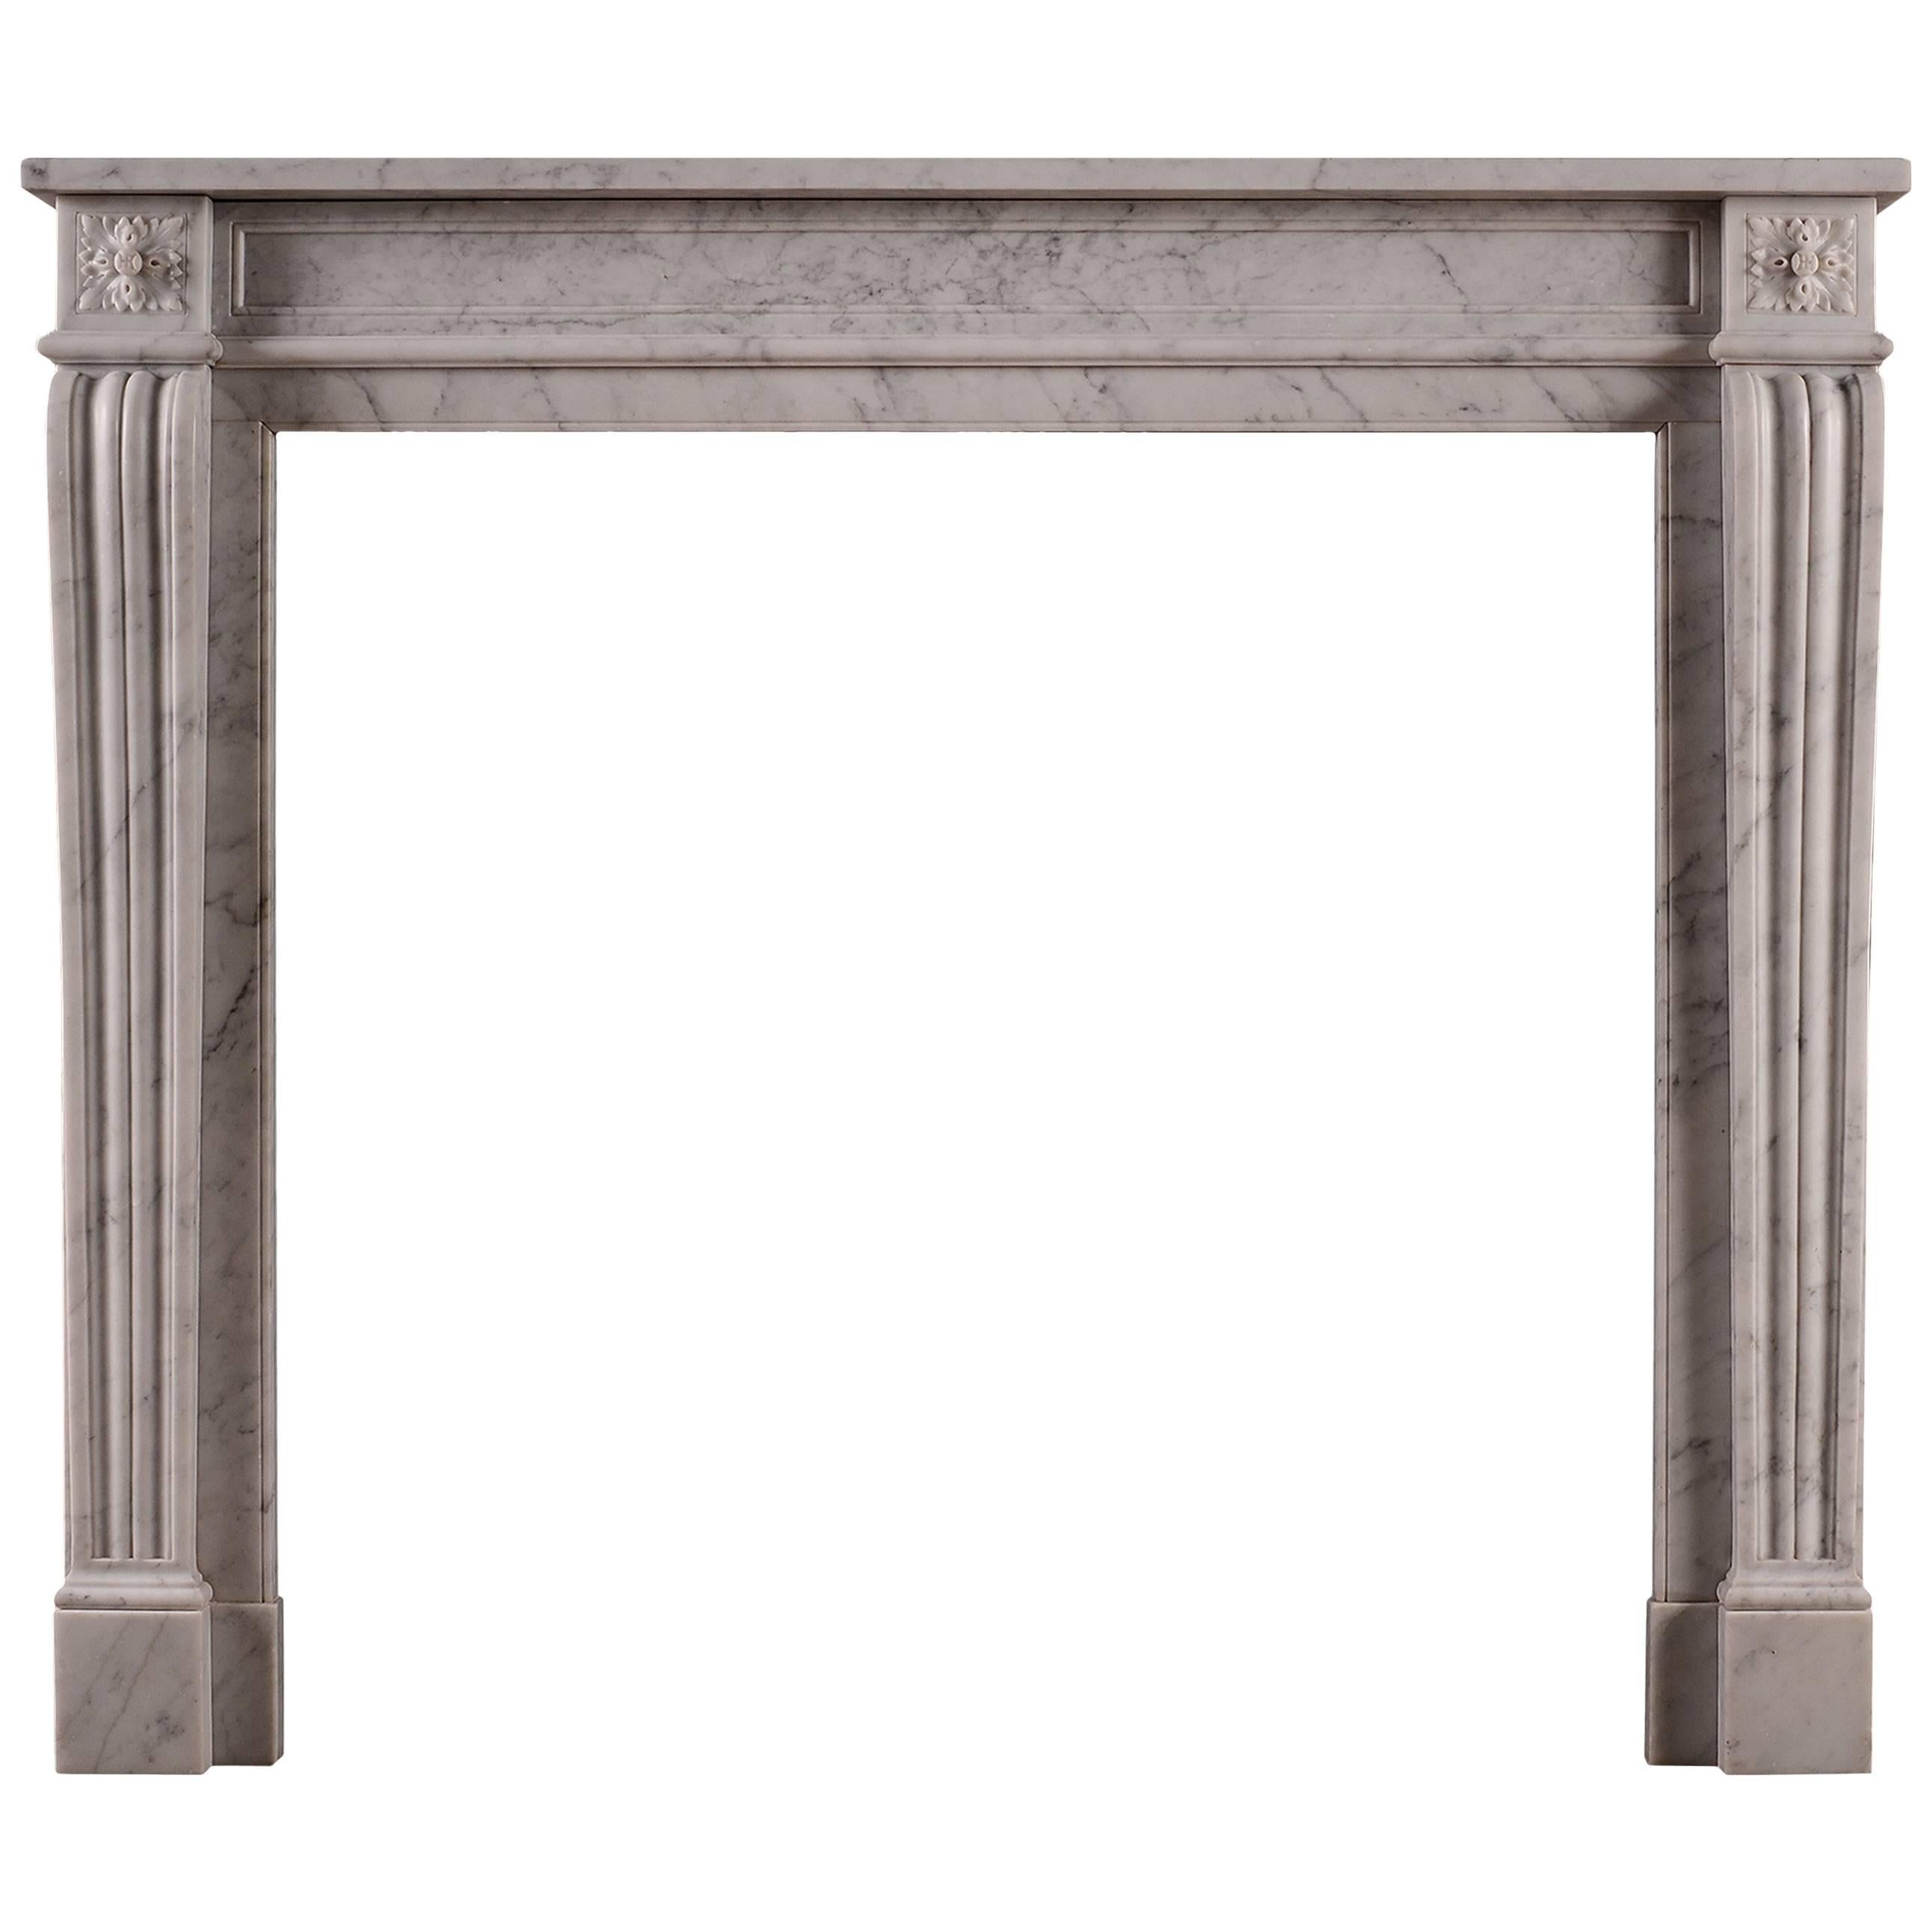 19th Century Carved Marble Fireplace in the Louis XVI Style For Sale